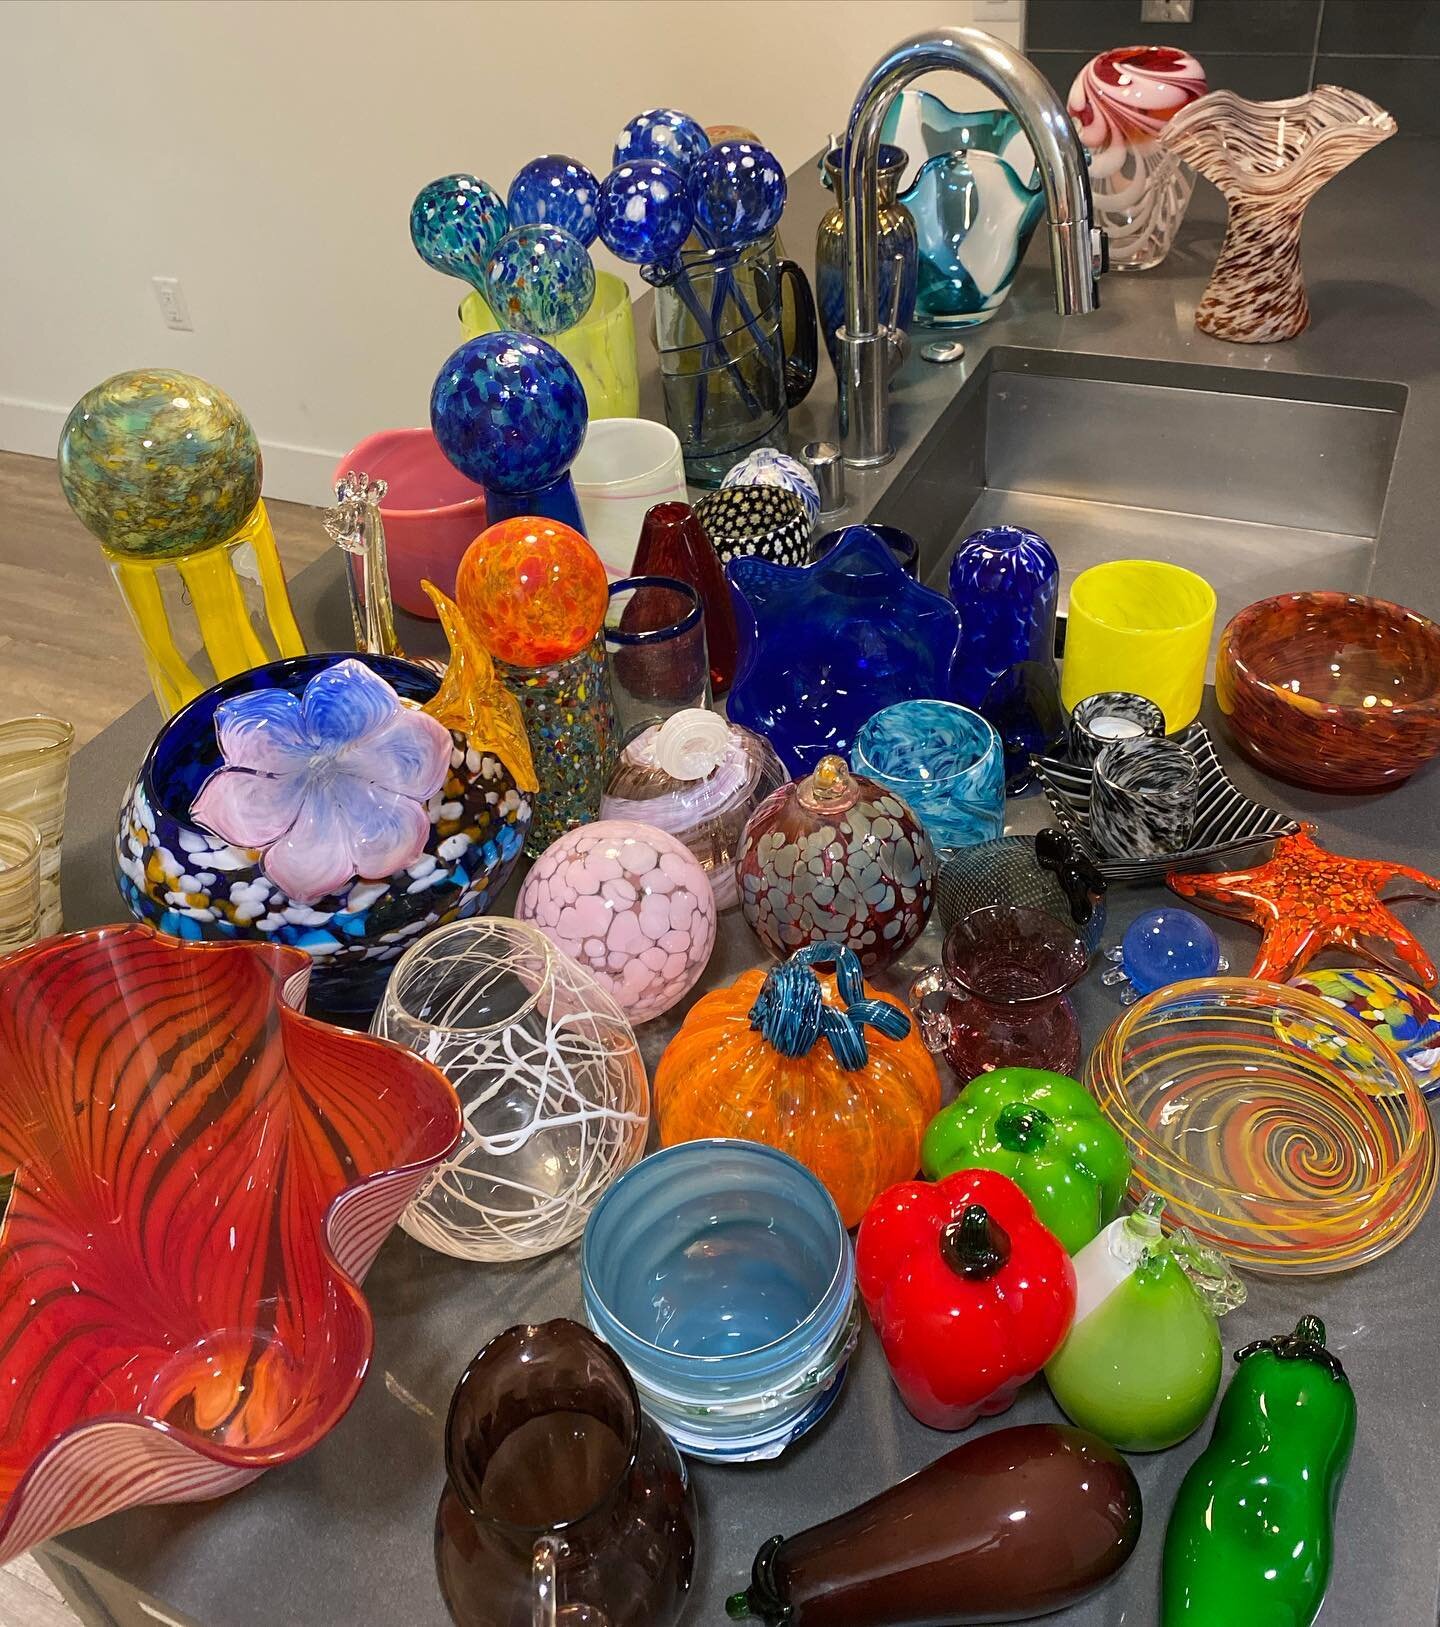 My art gallery, also know as my new apartment. Most nerve wracking part of the move is done! All hand blown by yours truly. 
.
.
#blowglass #glassblowing #glassart #moving #newapartment #southlakeunion #color #texture #artgallery #art #girlsthatblowg